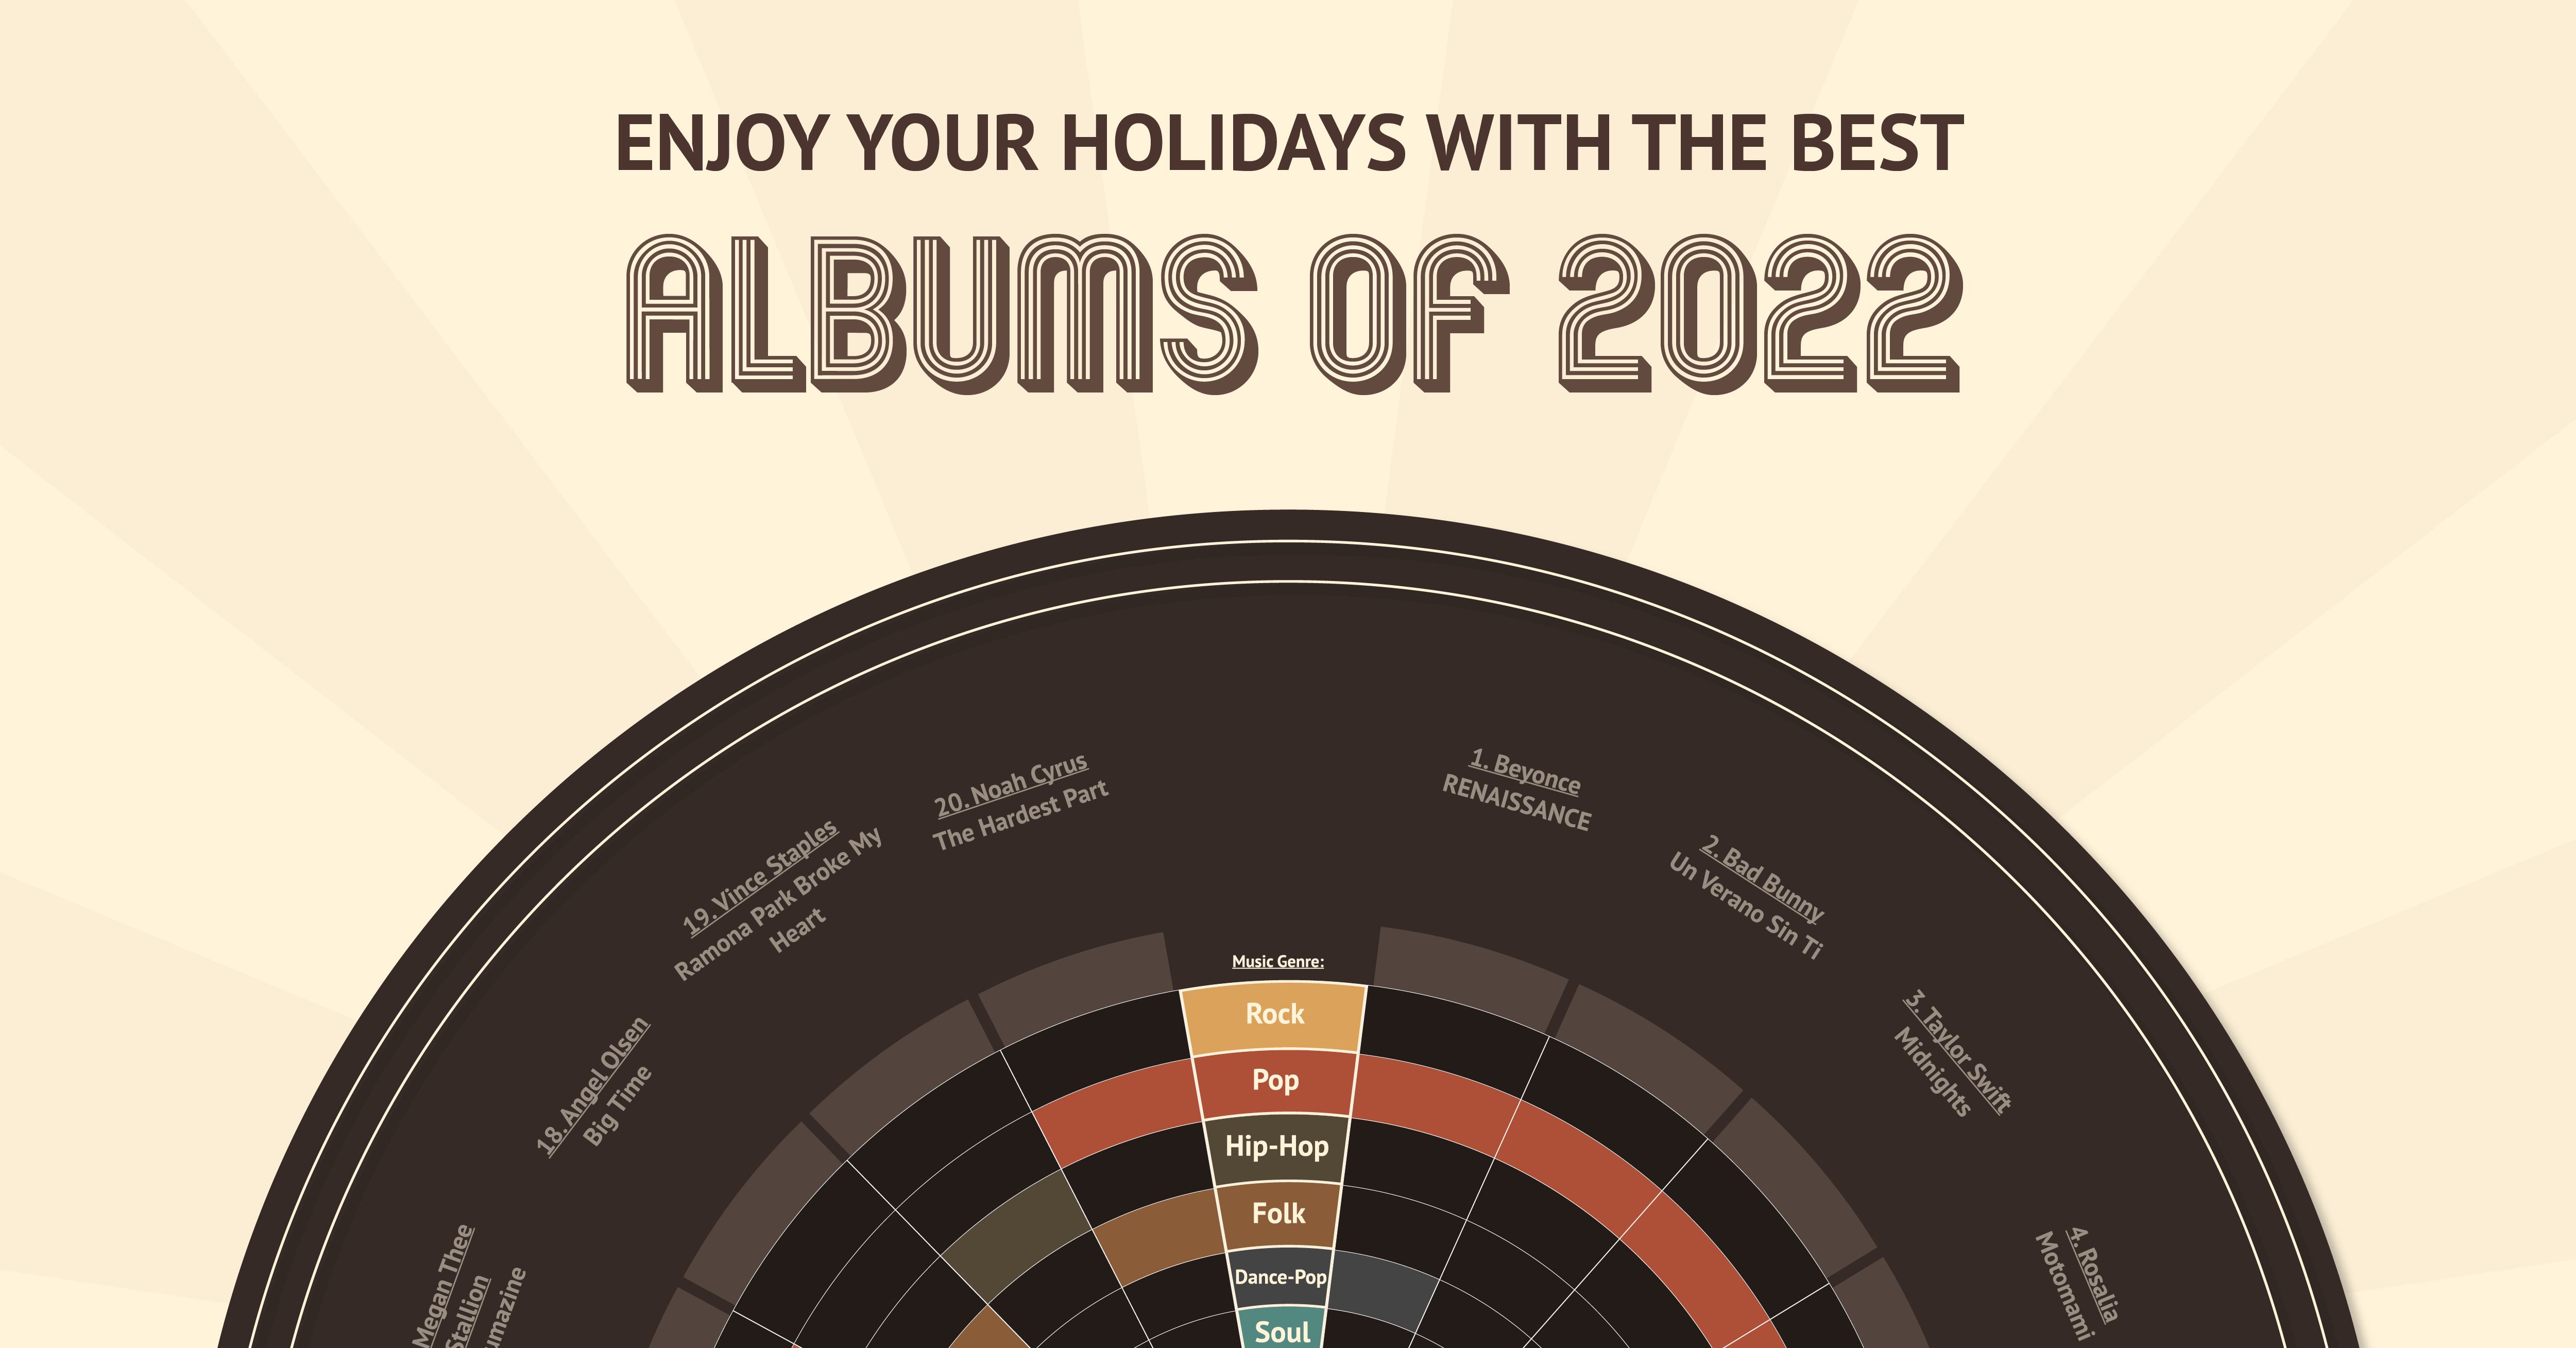 This is a featured image of the article that reads "Enjoy your holidays with the best albums of 2022"